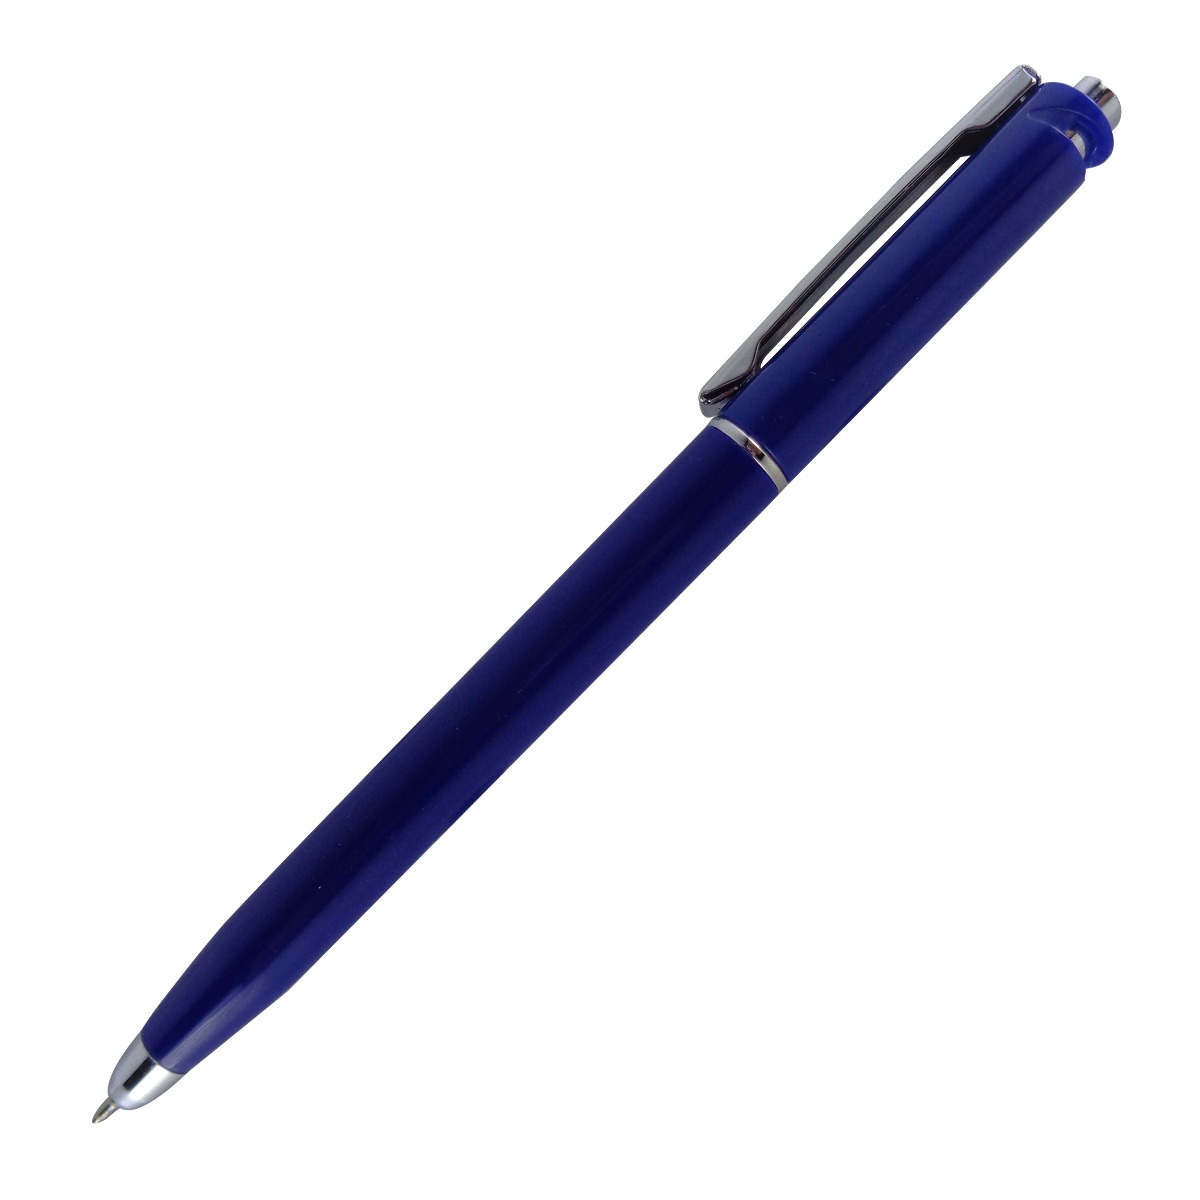 Reynolds Model: 15052 Jetter classic Blue color body with silver clip fine tip retractable ball pen